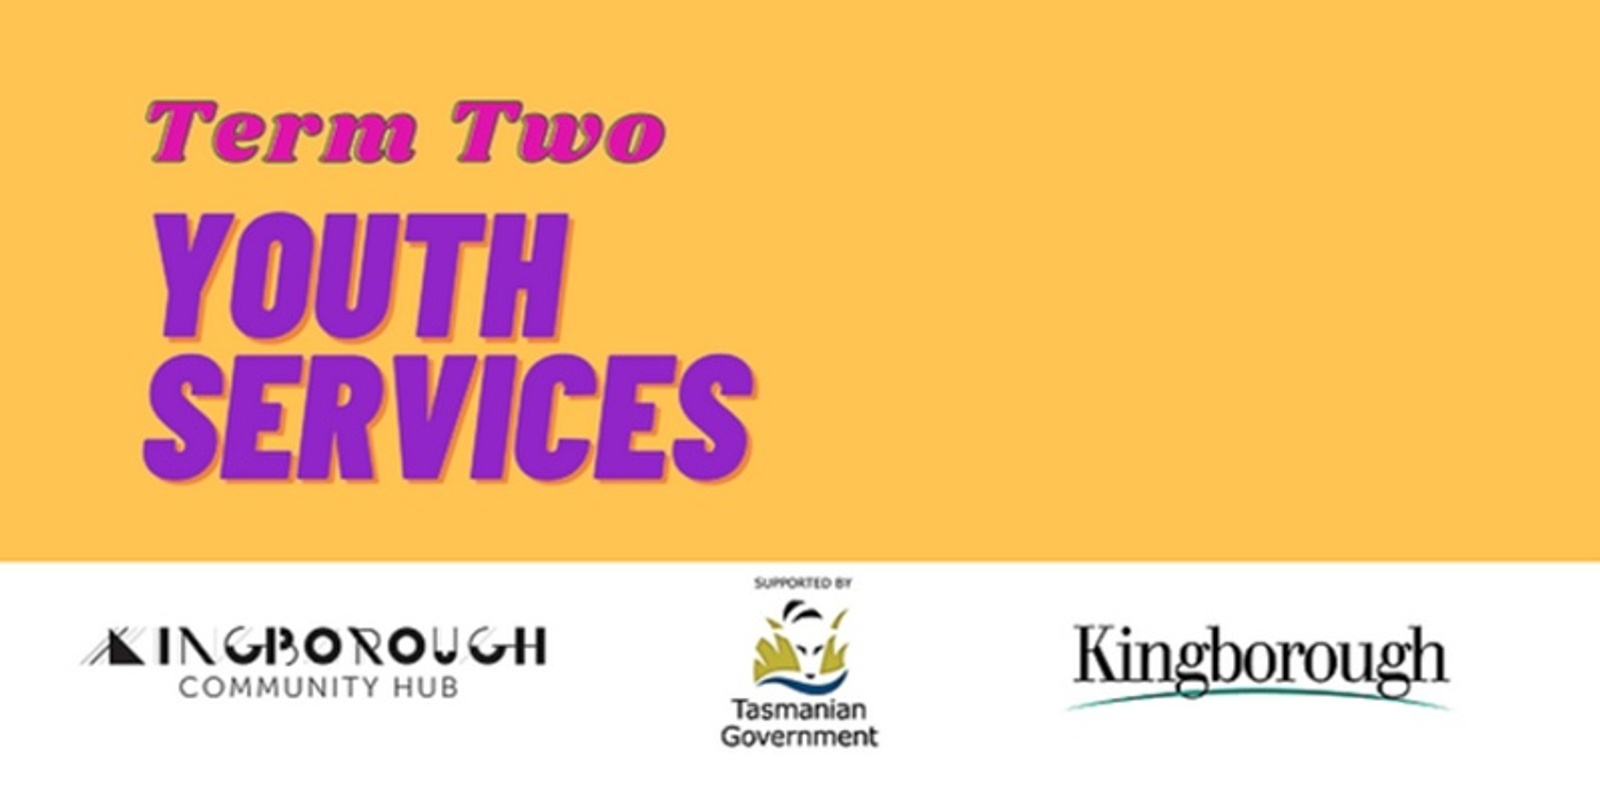 Banner image for Term Two Youth Services Kingborough Council 